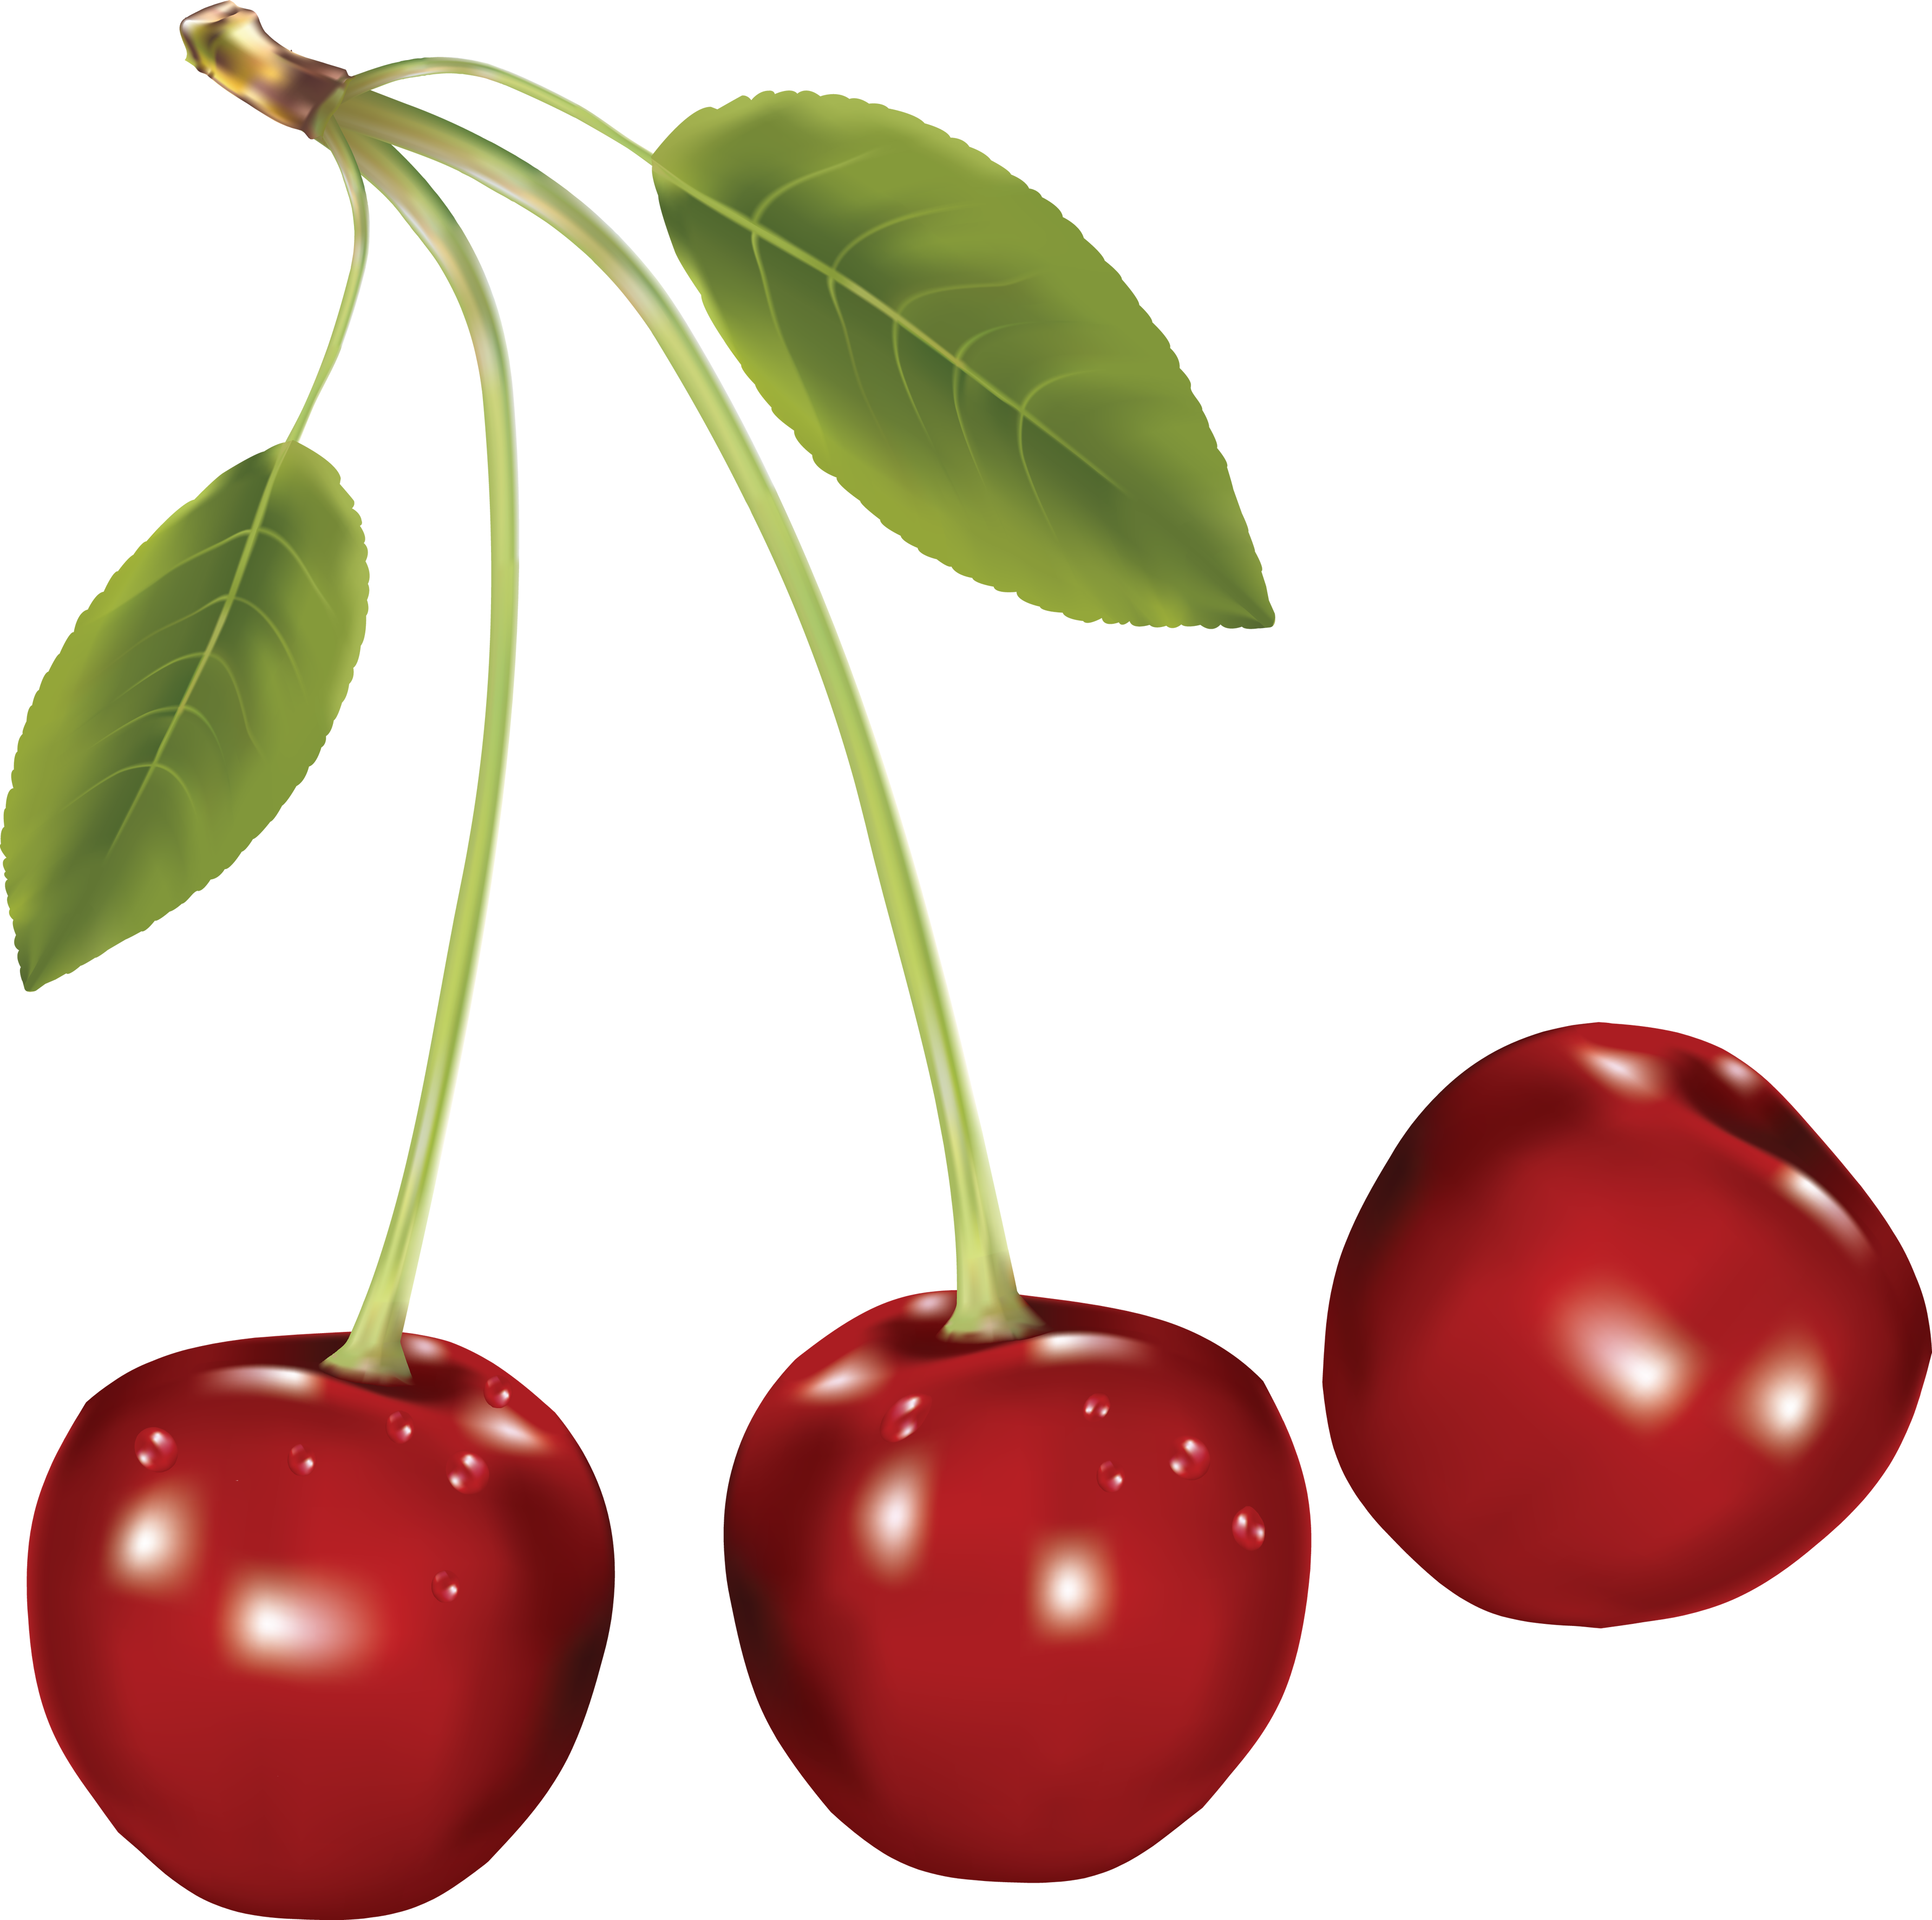 Cherries Png Image - Cherry, Transparent background PNG HD thumbnail